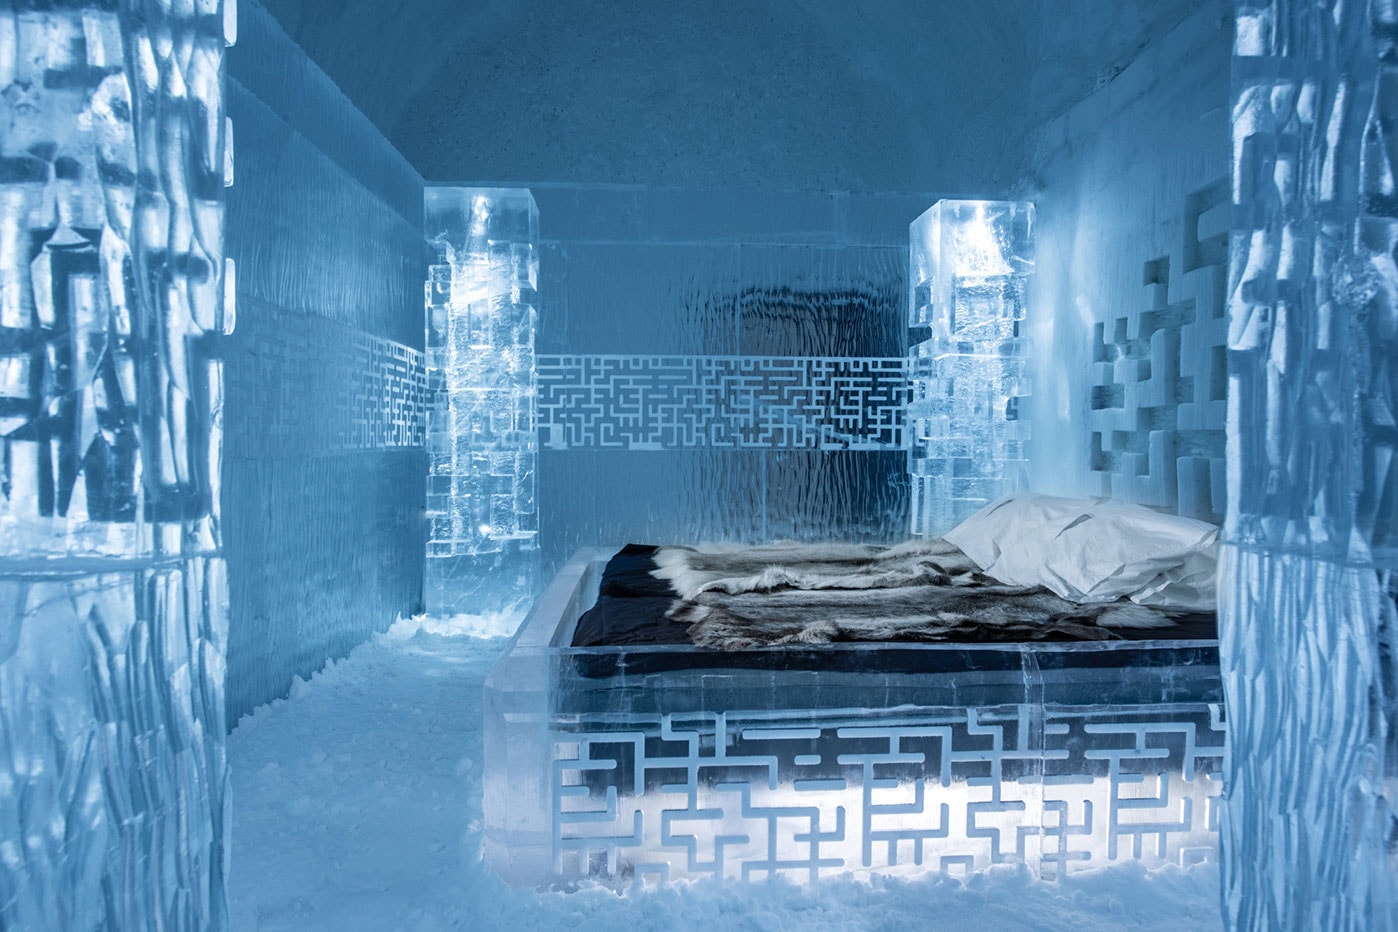 World's First Permanent Ice Hotel